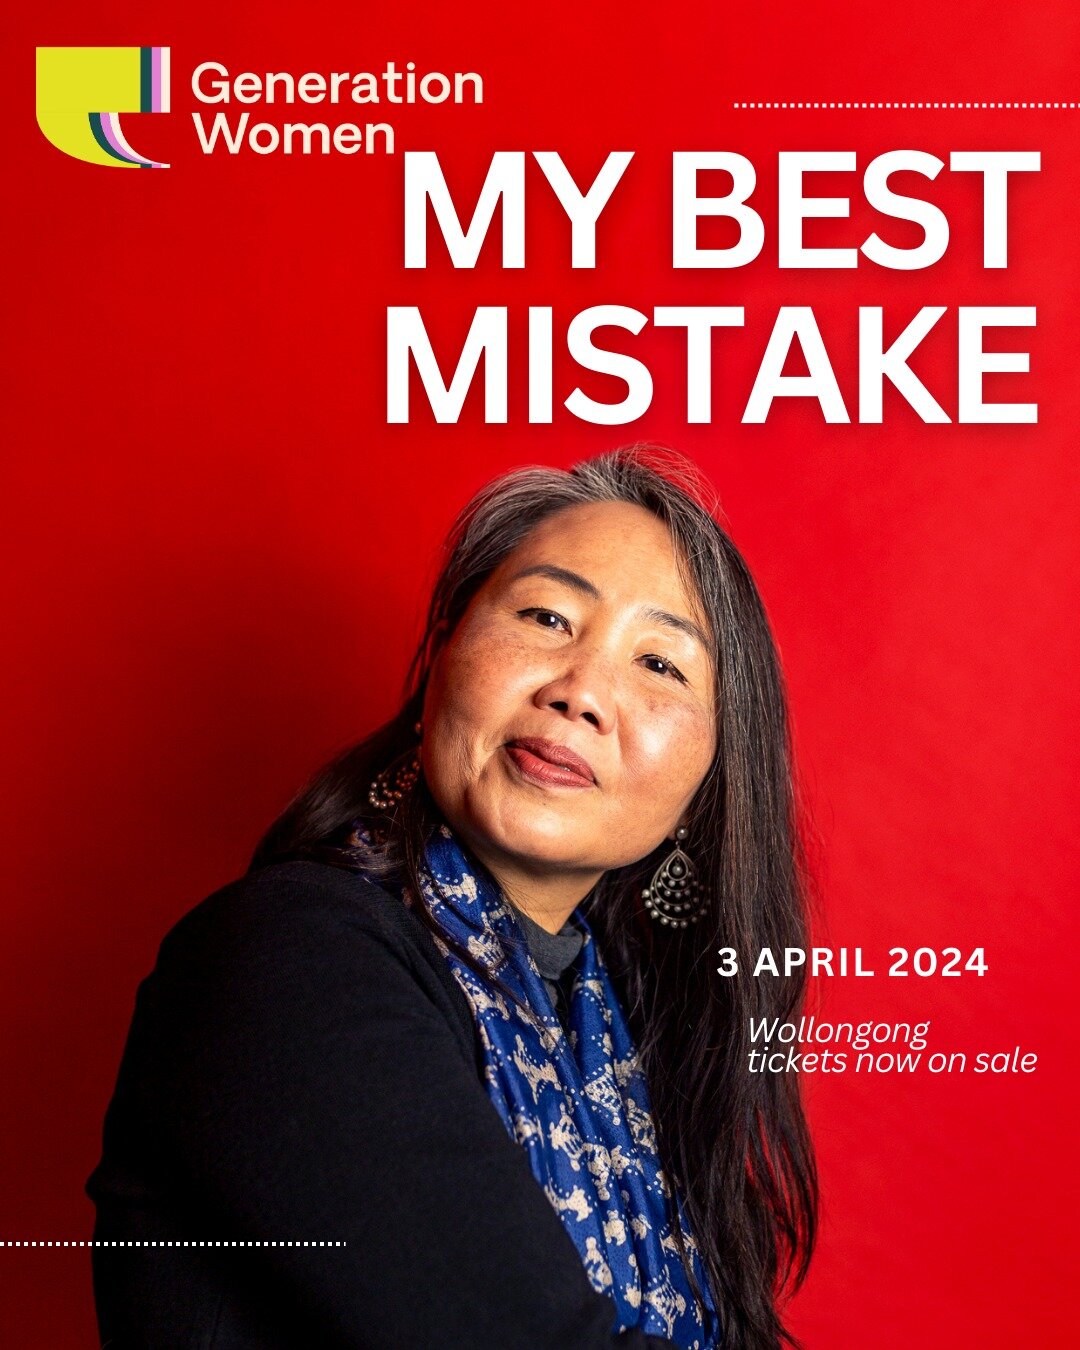 The COUNTDOWN is on! Only 17 days to go!

For the first time, we are taking Generation Women to Wollongong! 

Join us in April for the inaugural pop-up Generation Women show in Wollongong. 

✨ Theme: My Best Mistake: Stories of Wrongs That Went Right